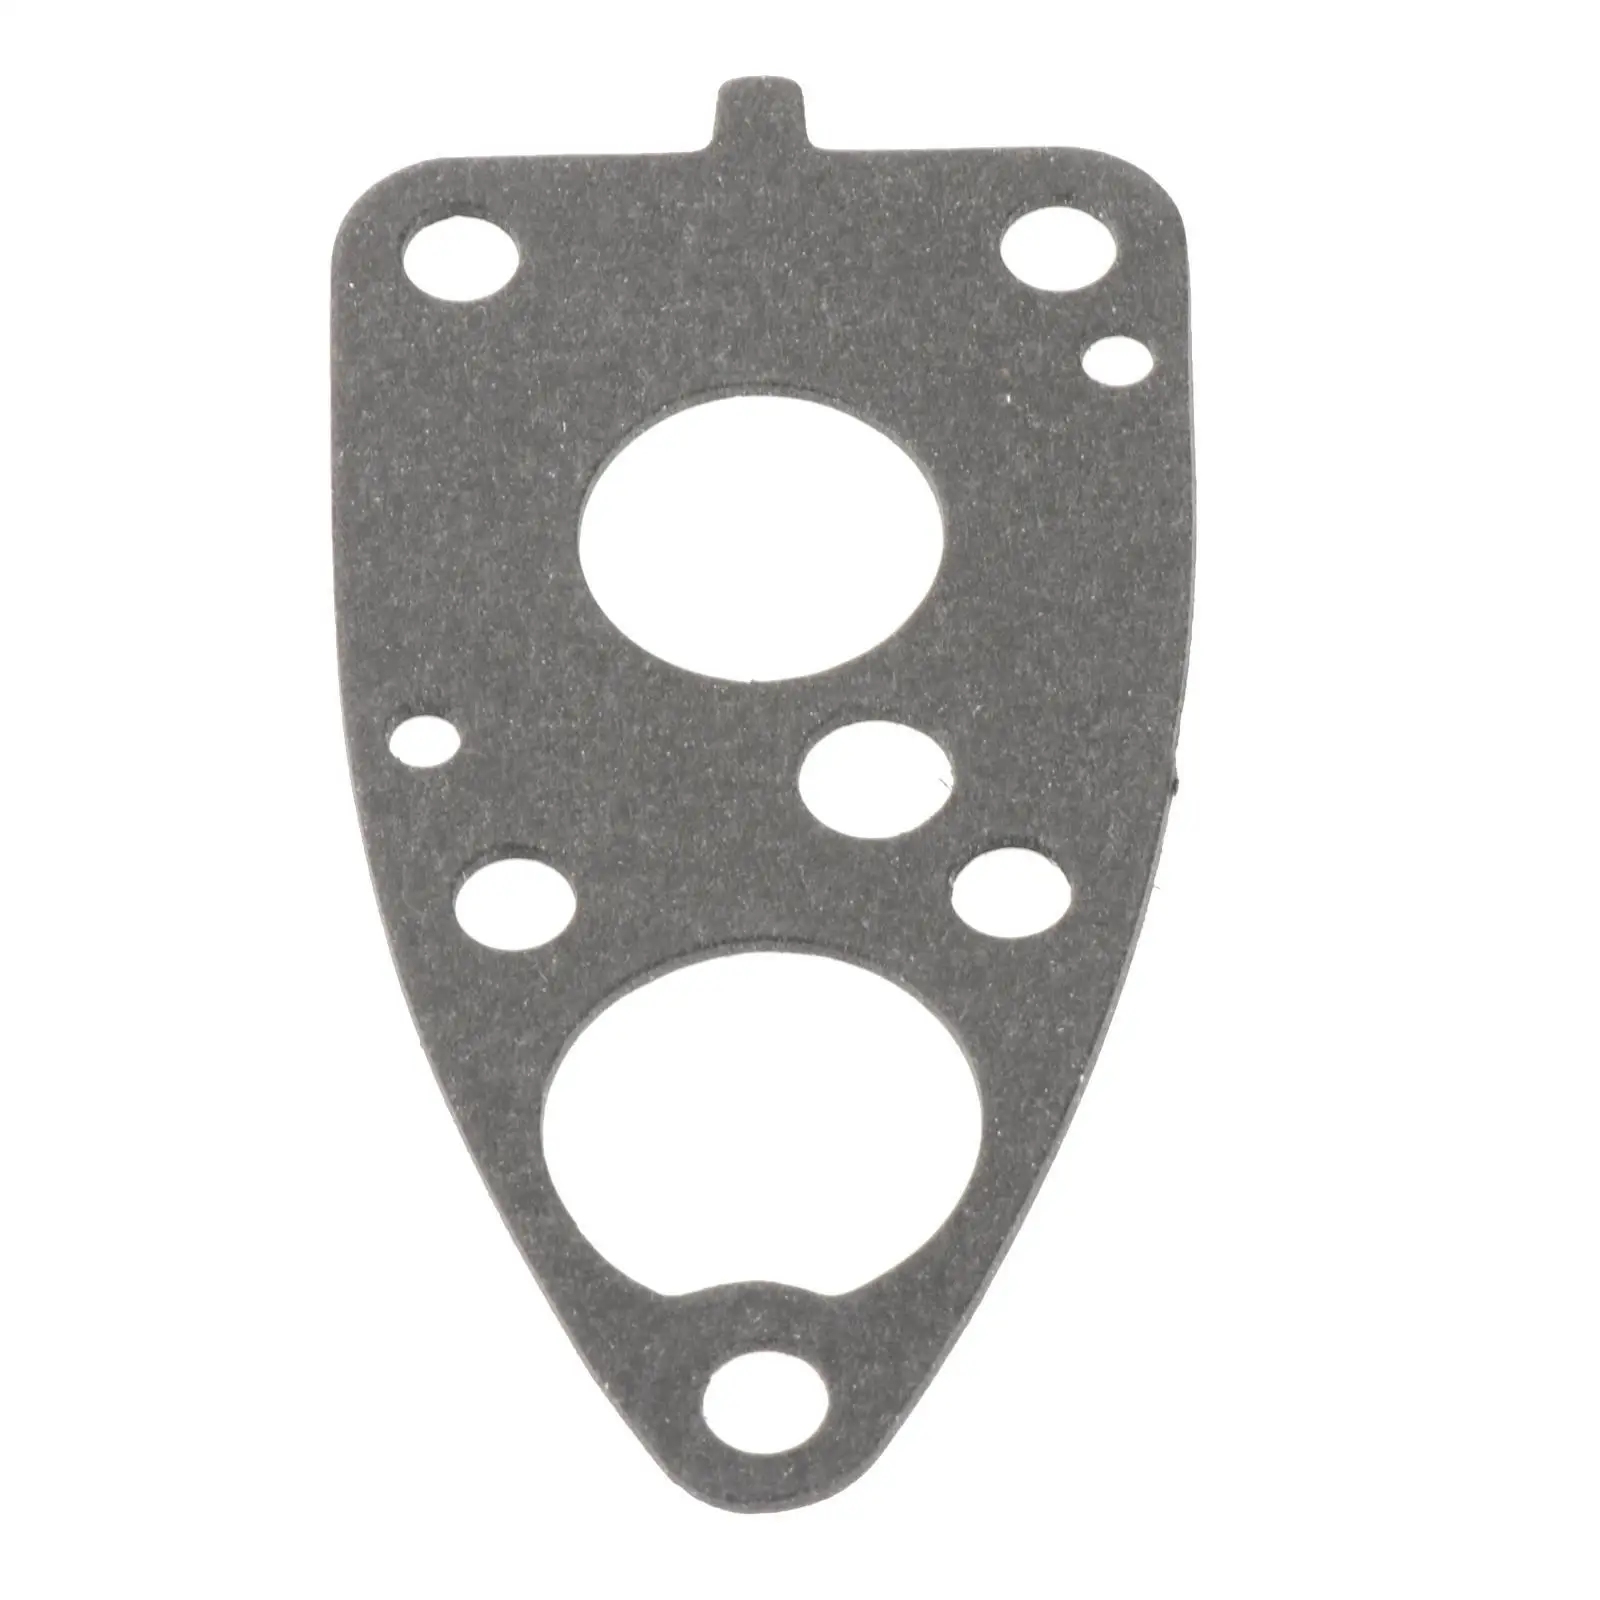 Packing Lower Case, Supplies Silver Lower Gear Case Plate Gasket Fit for Yamaha F4A 4A 4B 5C 6E0-45315-A0-00 Outboard Engine